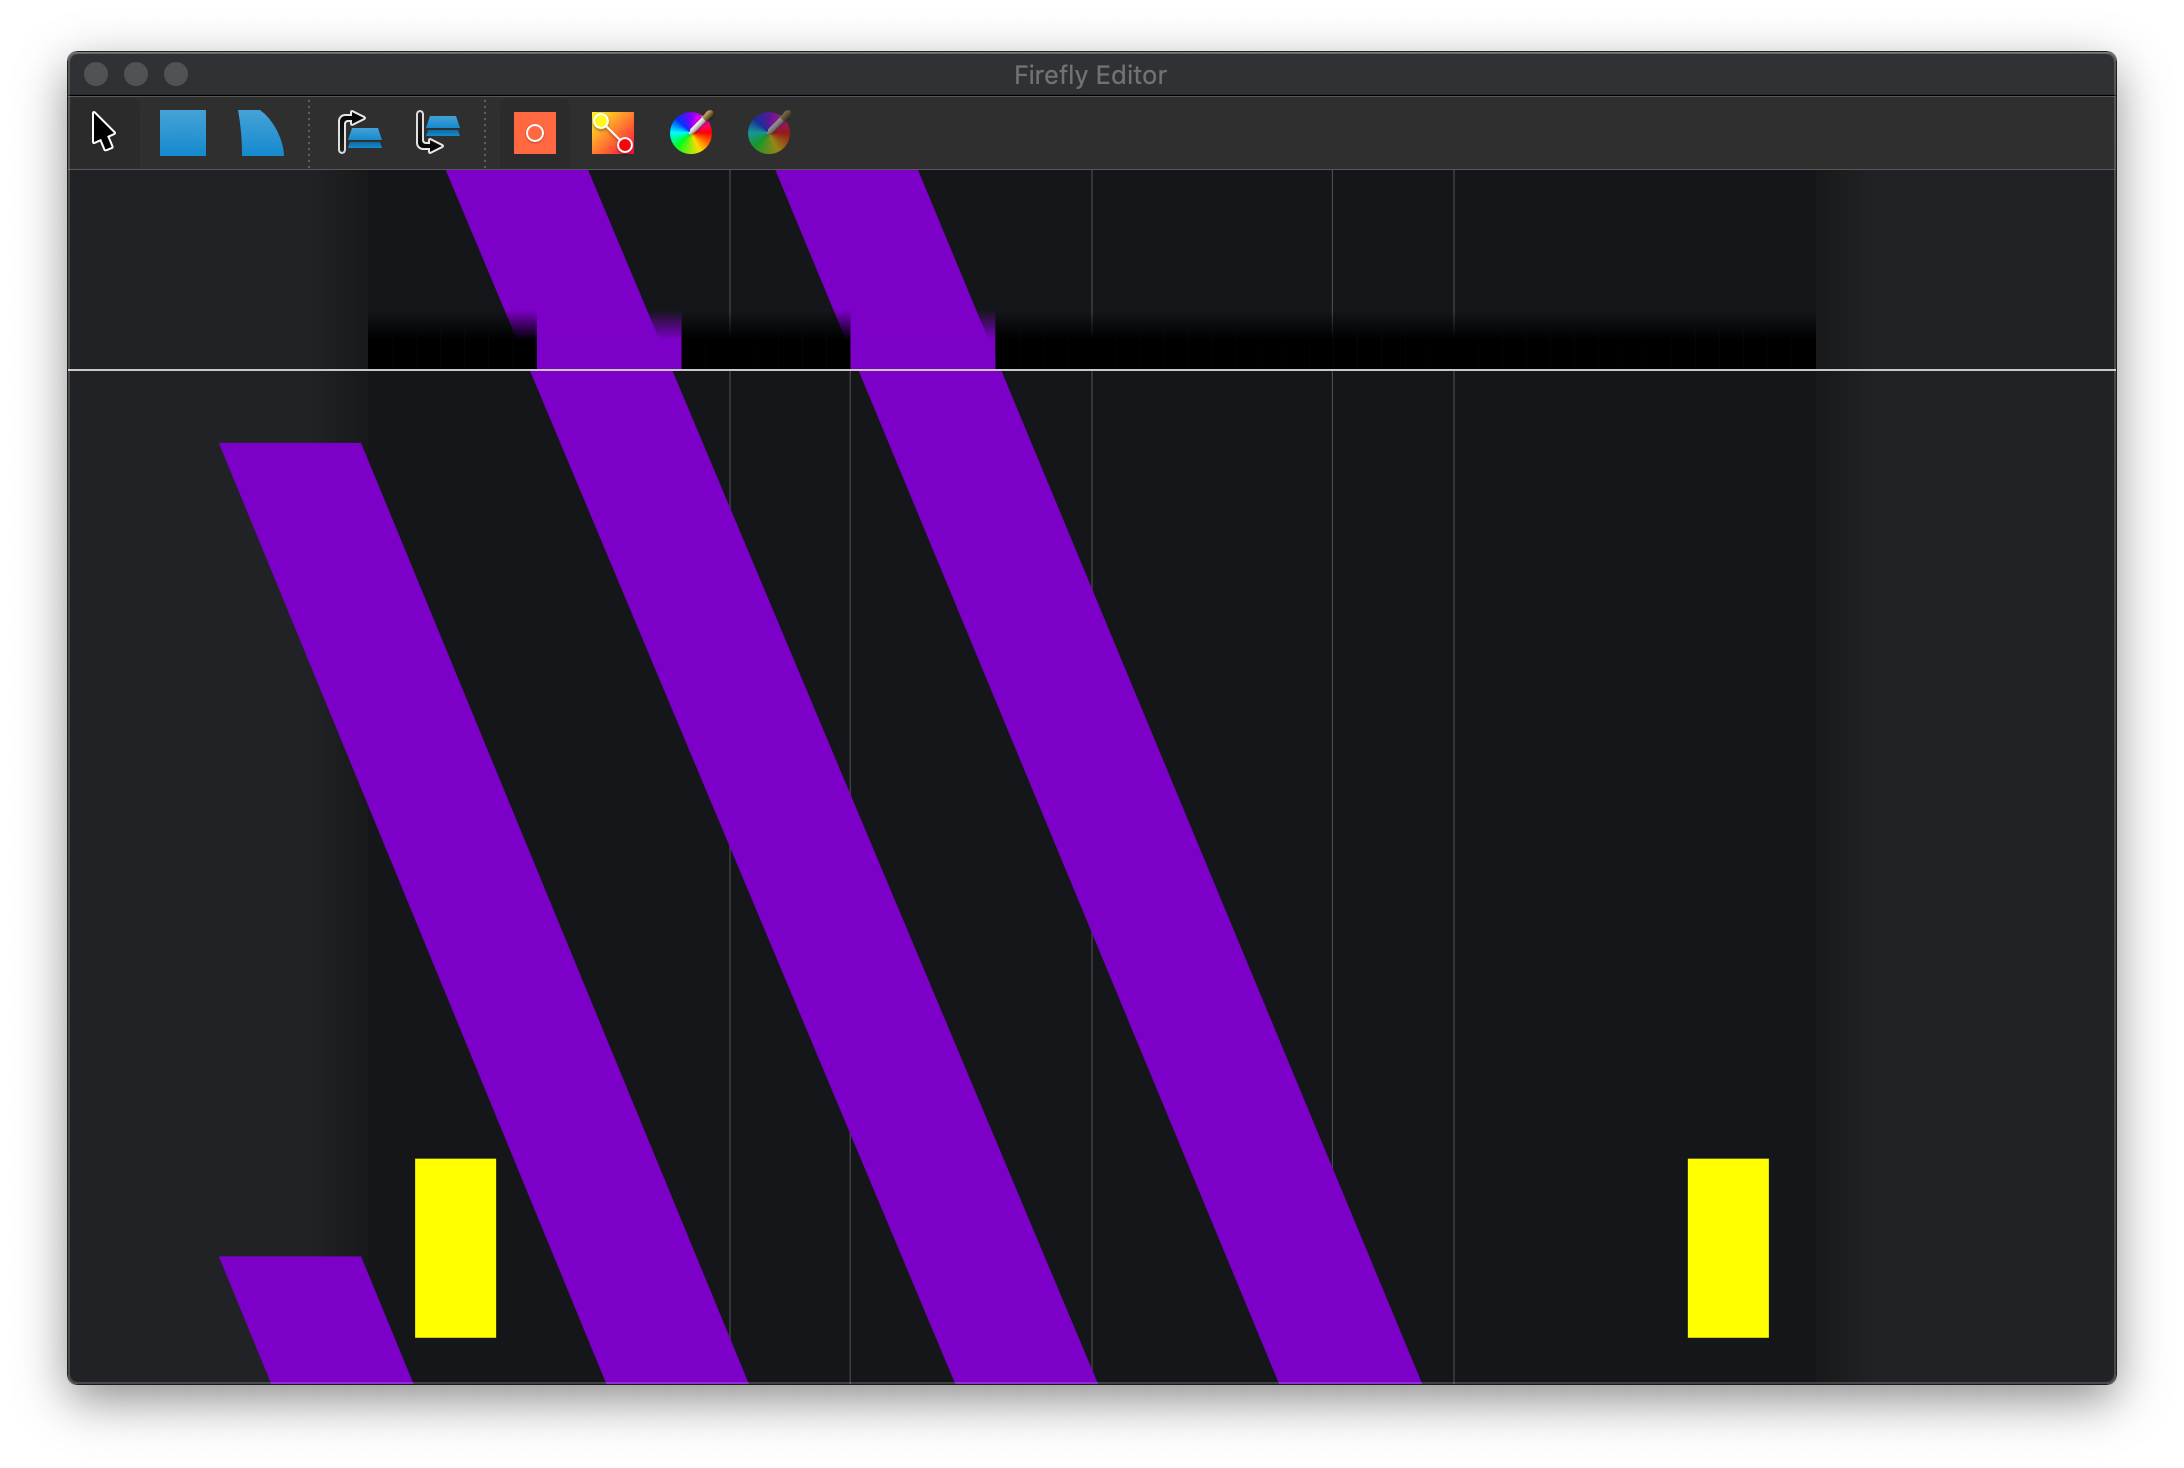 A screenshot of the Firefly editor. Showing multiple stripes that are animated to move over the led strip over time.